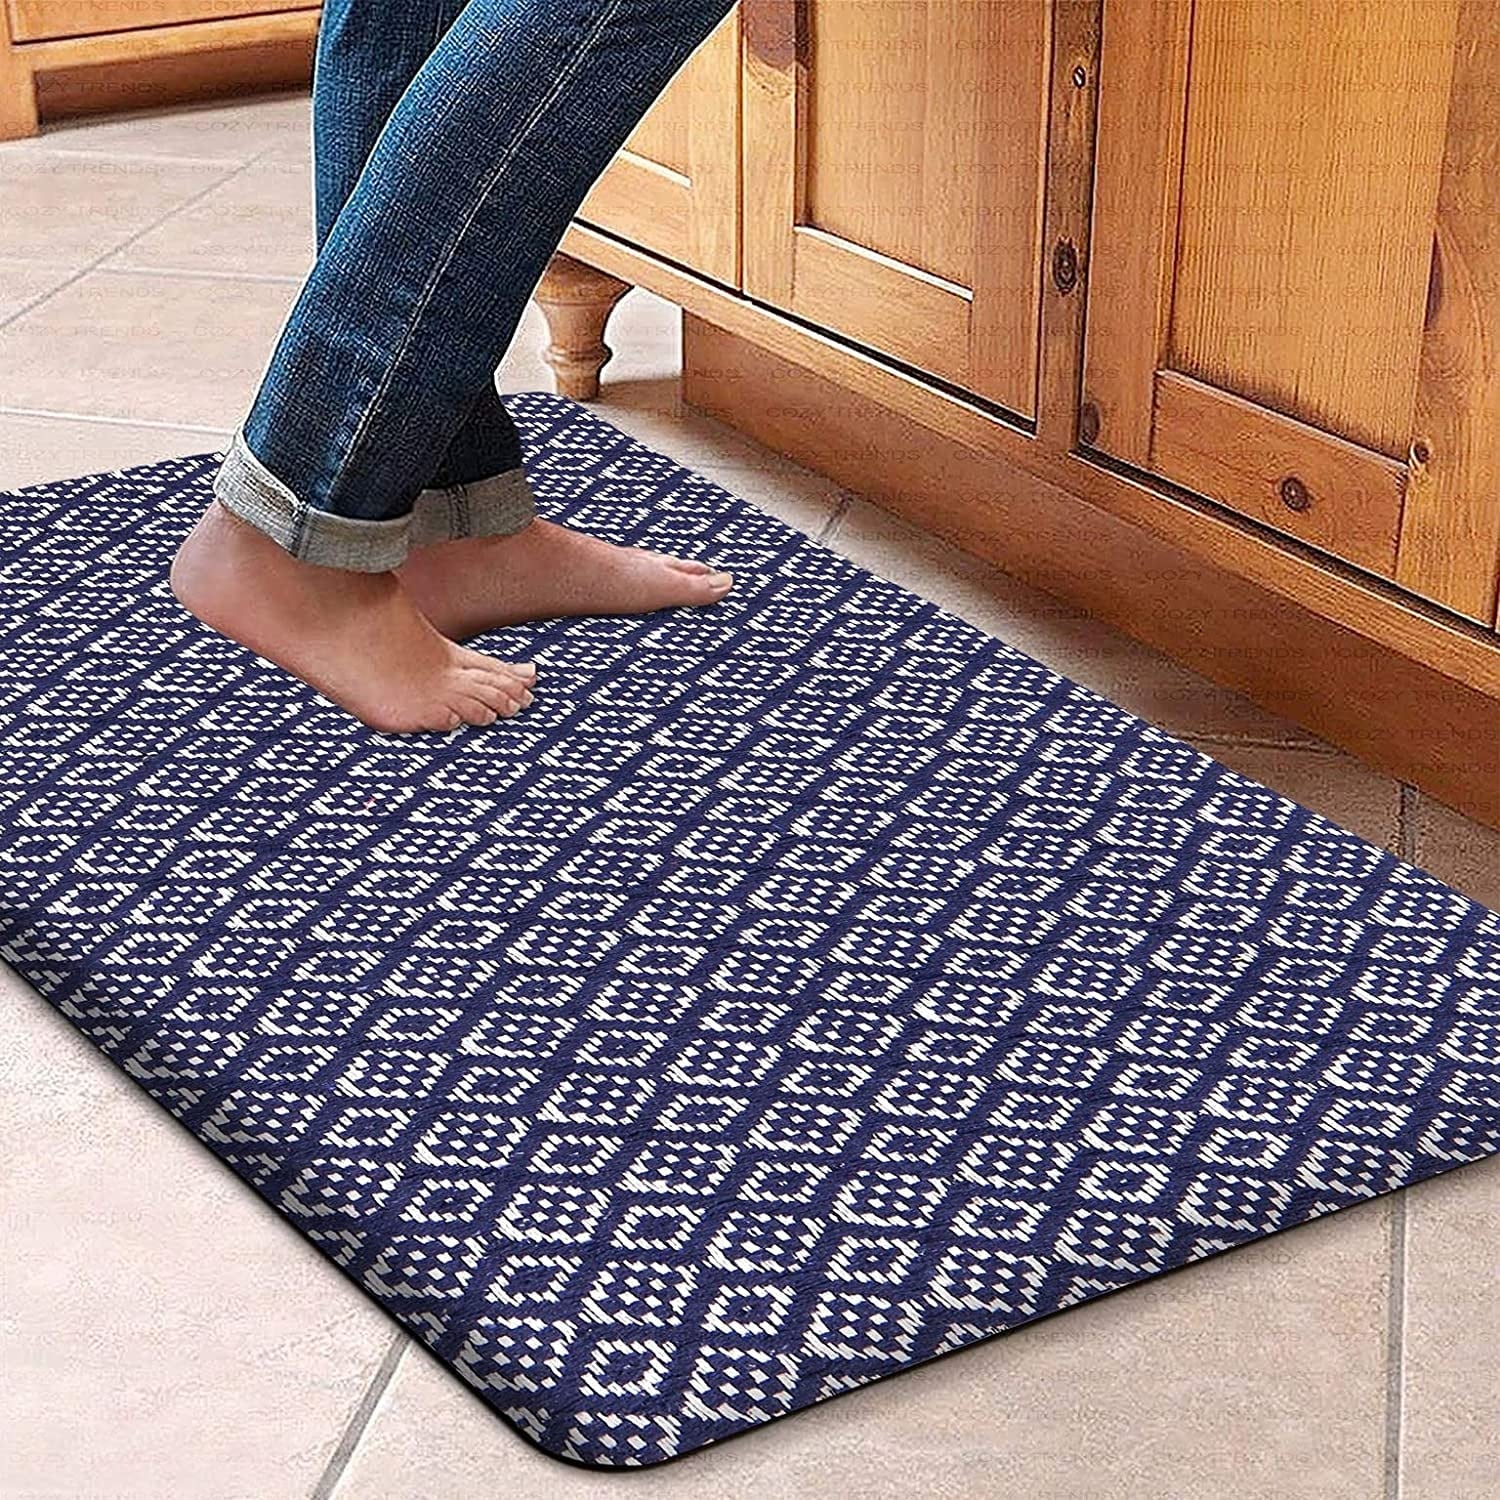 https://ak1.ostkcdn.com/images/products/is/images/direct/690af9469aebb25a0d4a0e6b243329f4f38e6b42/Cotton-Kitchen-Mat-Cushioned-Anti-Fatigue-Rug%2C-Non-Slip-Mats-Comfort-Foam-Rug-for-Kitchen%2C-Office%2C-Sink%2C-Laundry---18%27%27x30%27%27.jpg